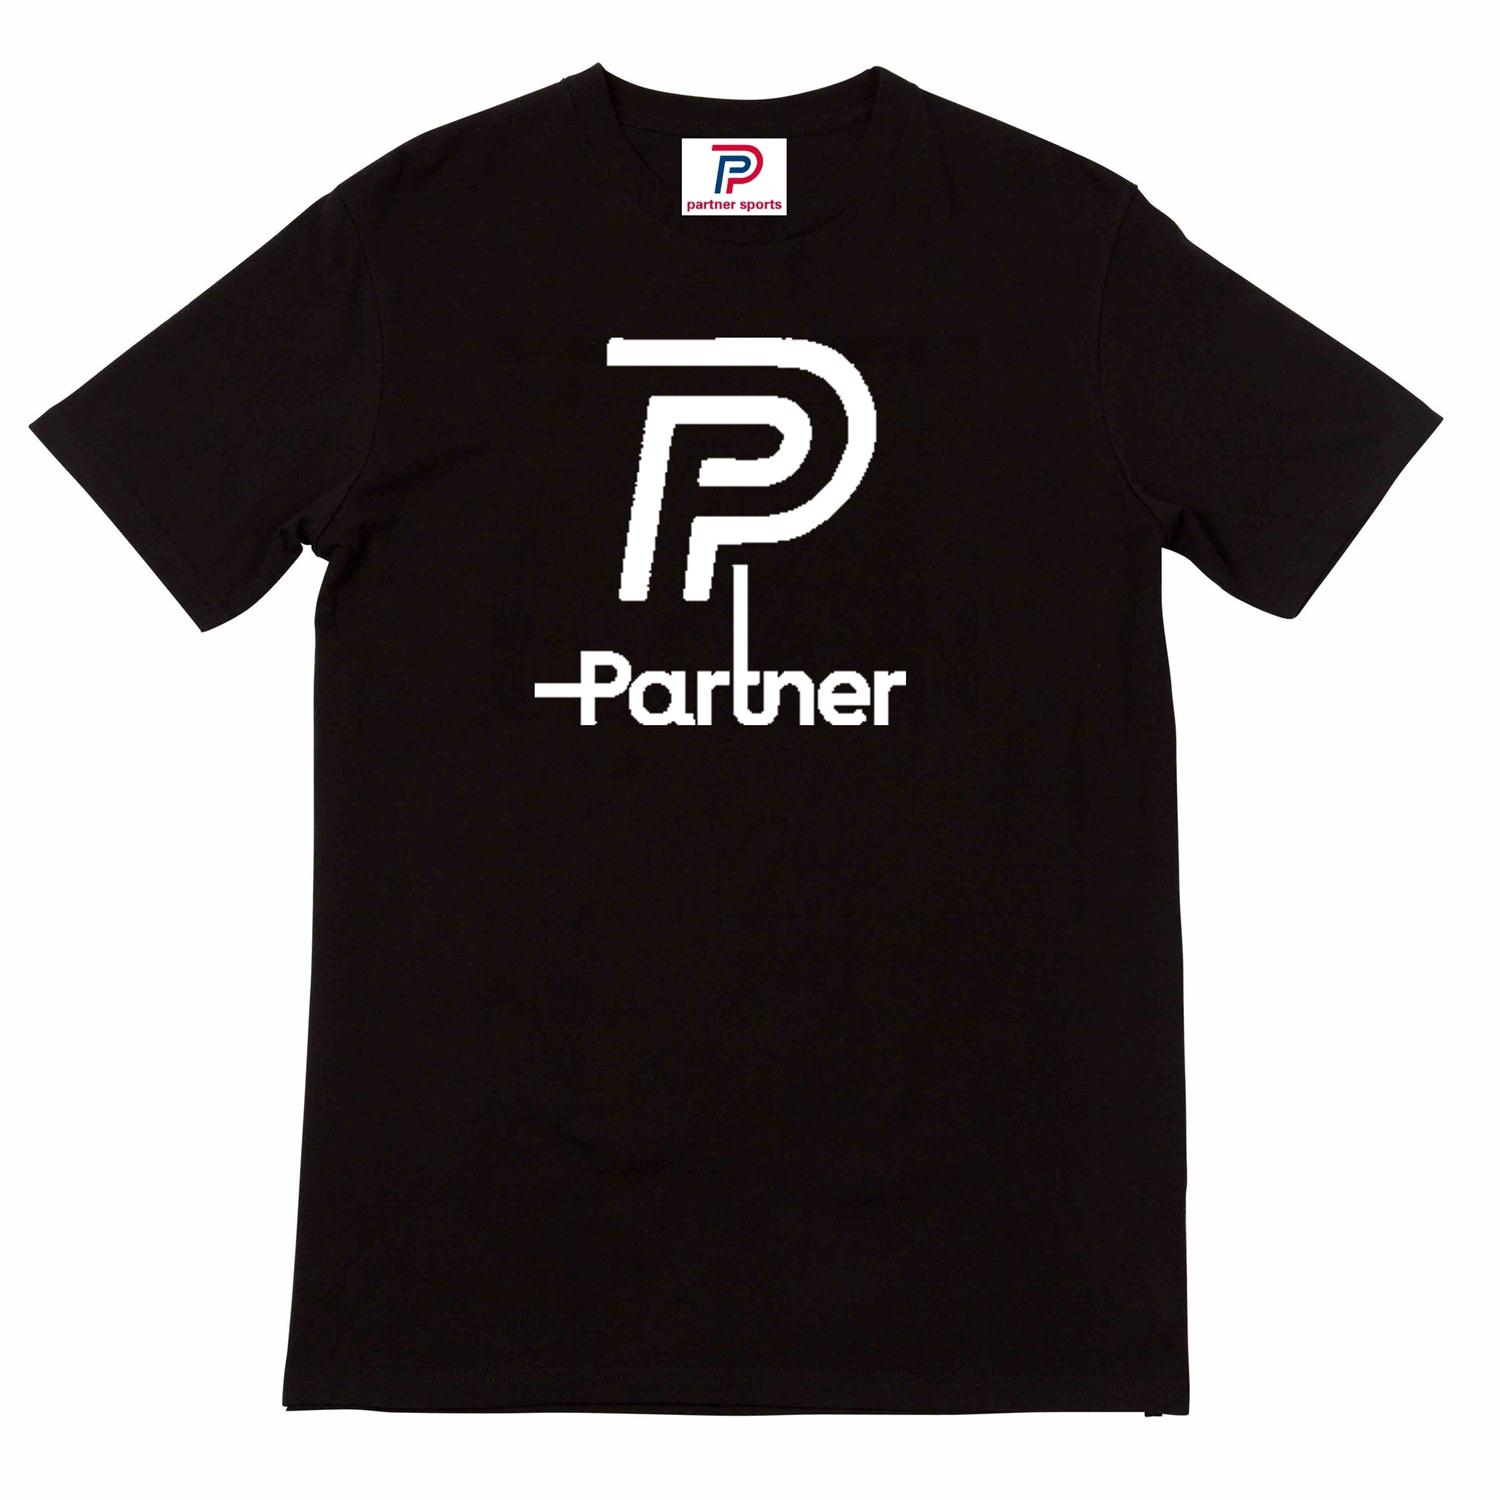 Partner sports men's sweat shirt small orders are available